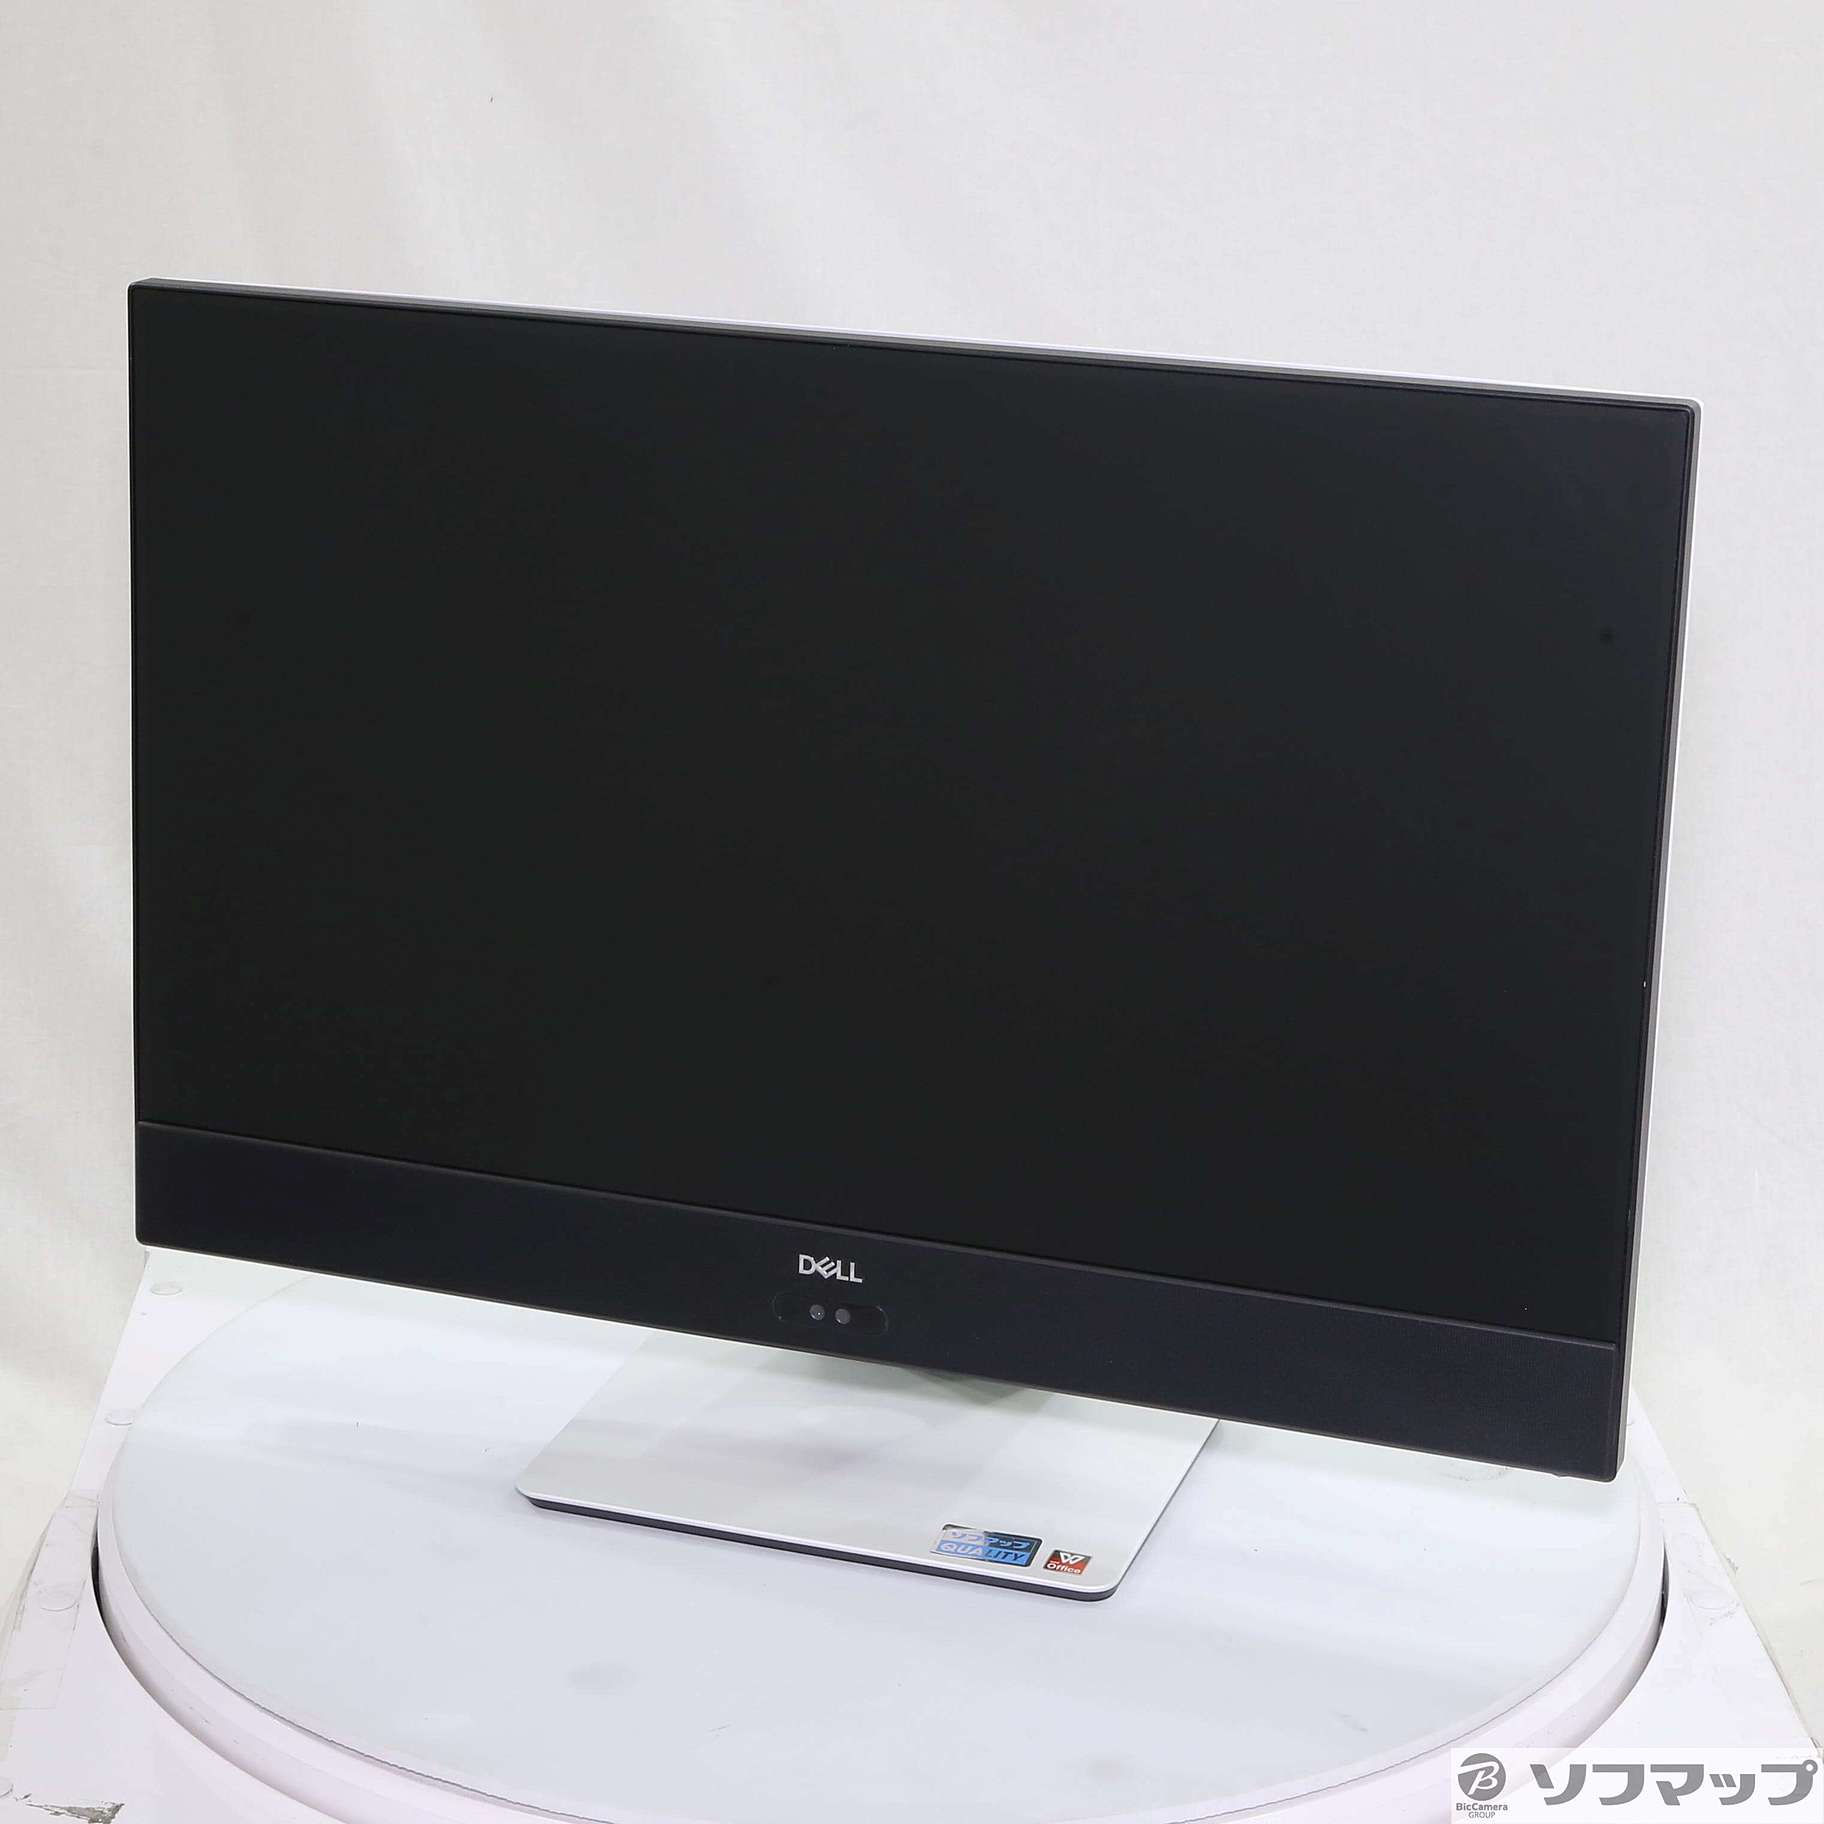 8GBSSD一体型パソコン DELL Inspiron 24-5475